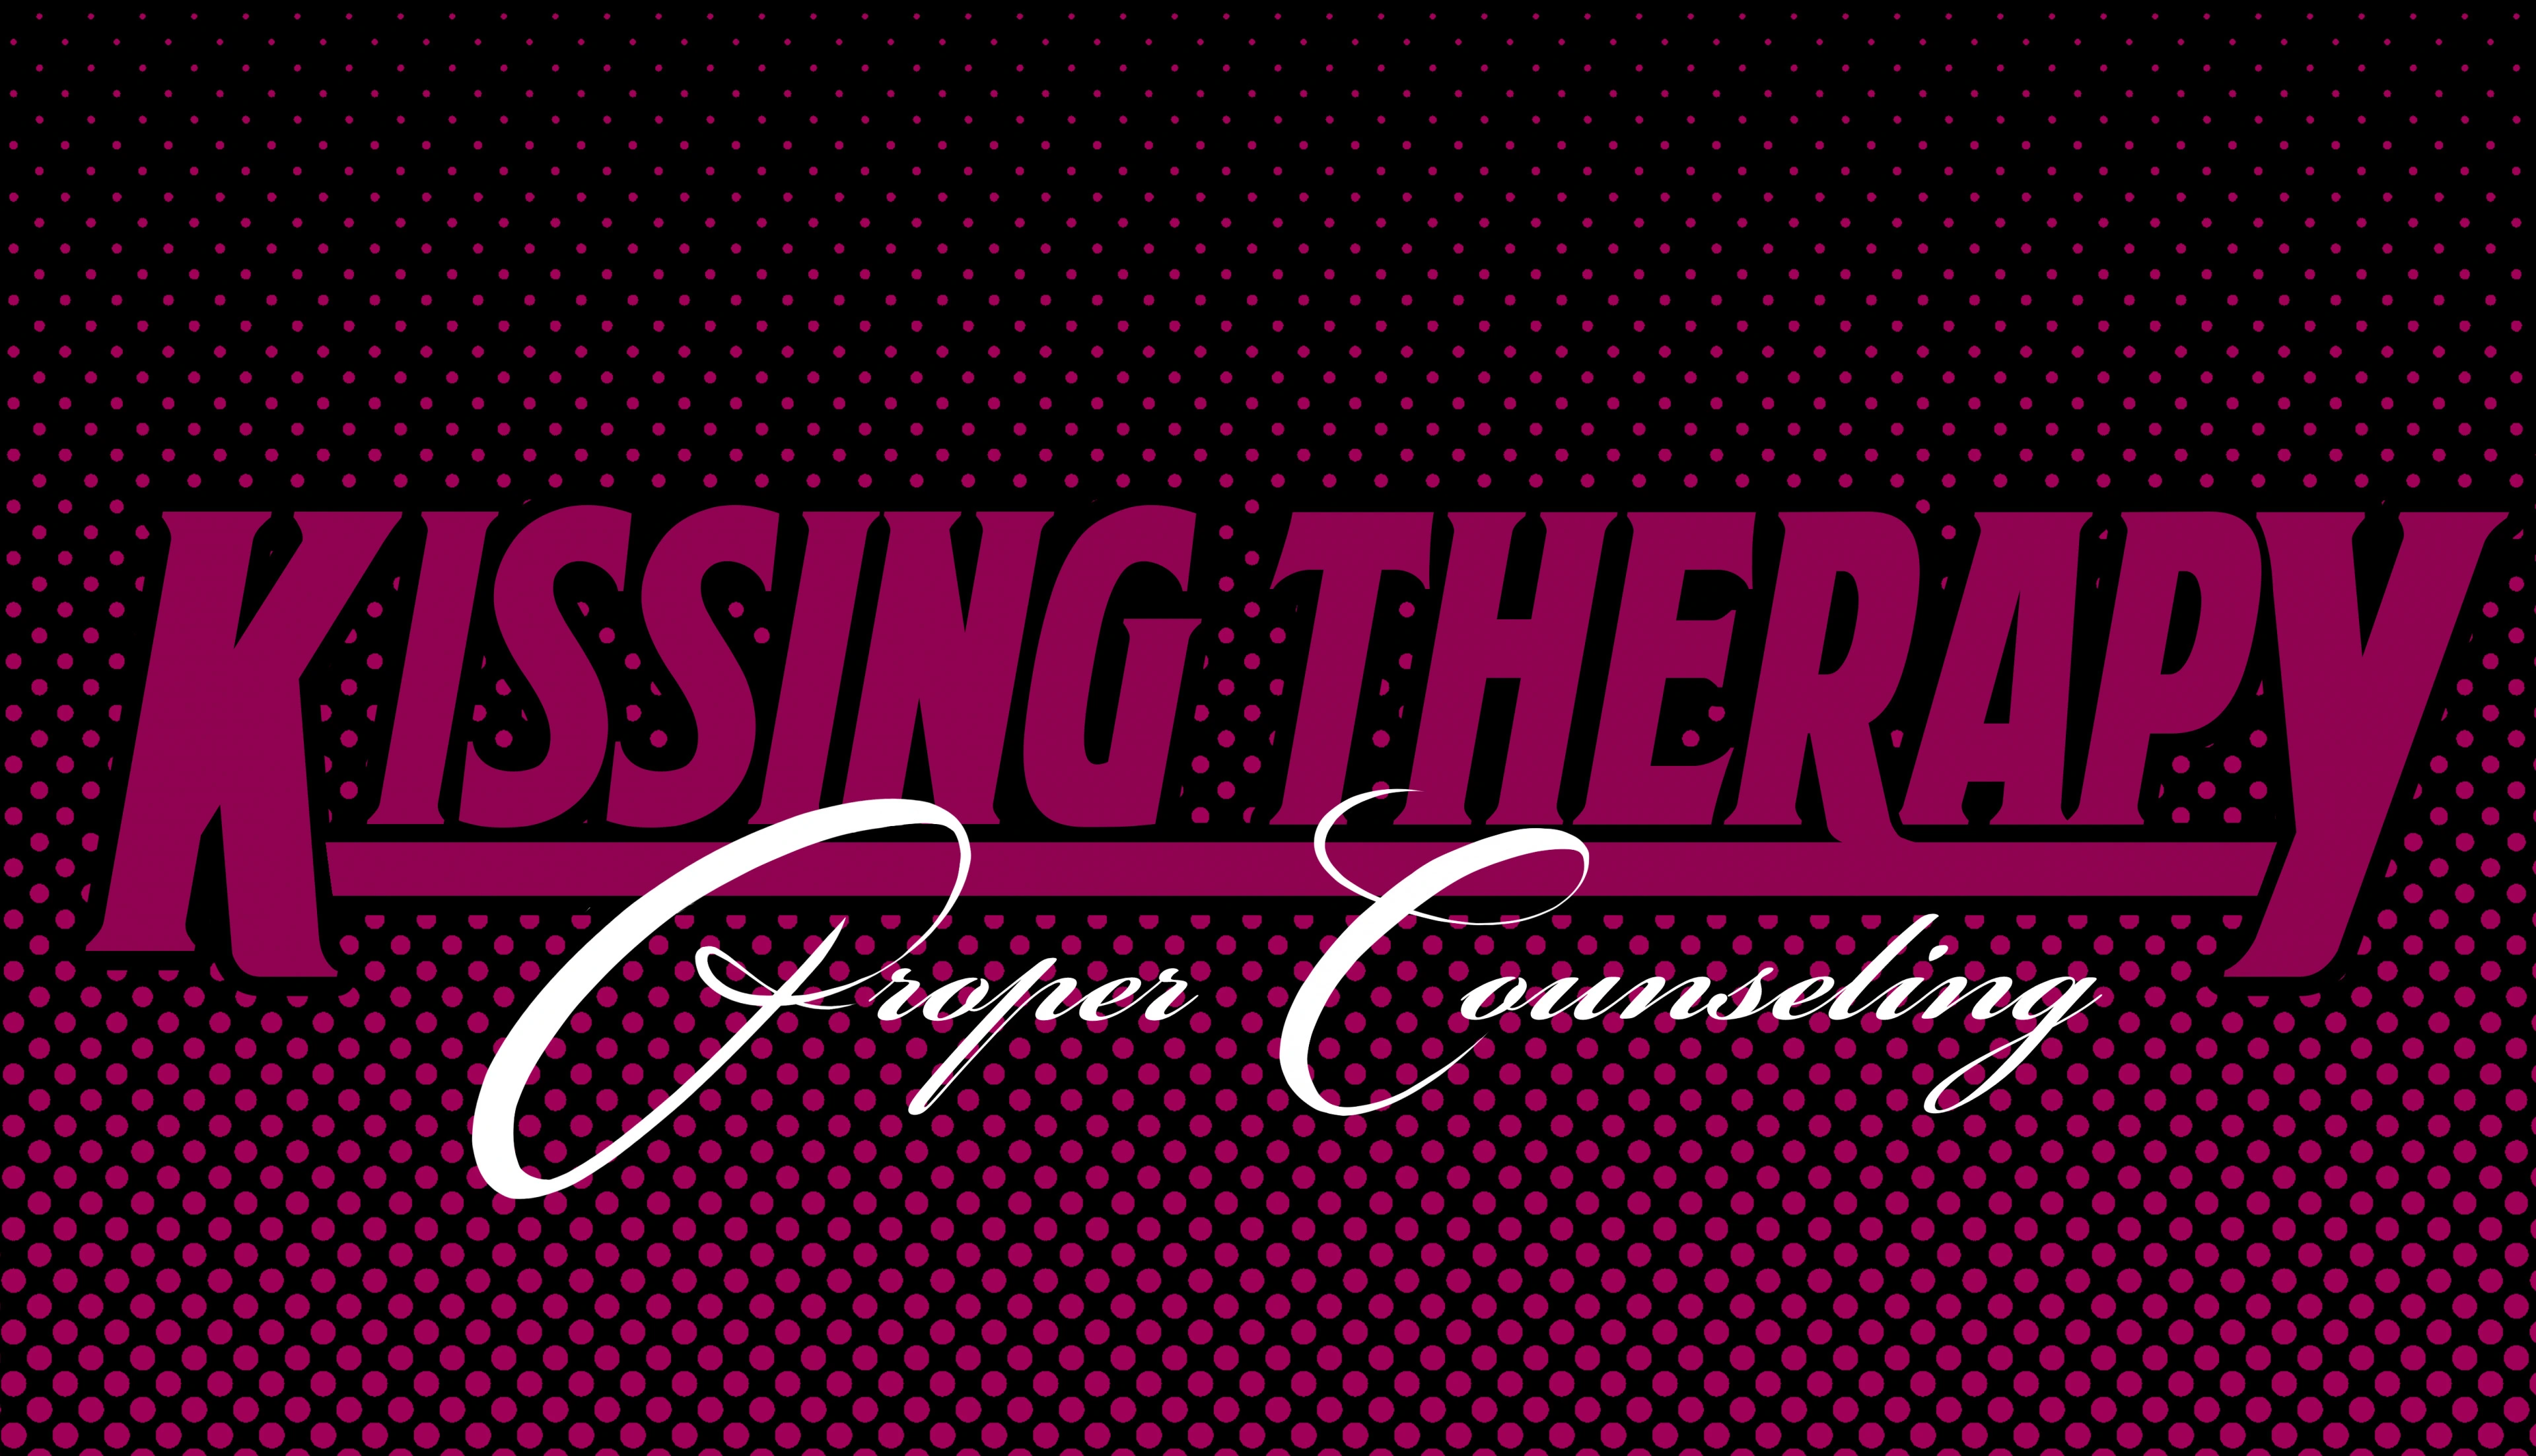 Kissing Therapy Proper Counselling [v1.019] main image